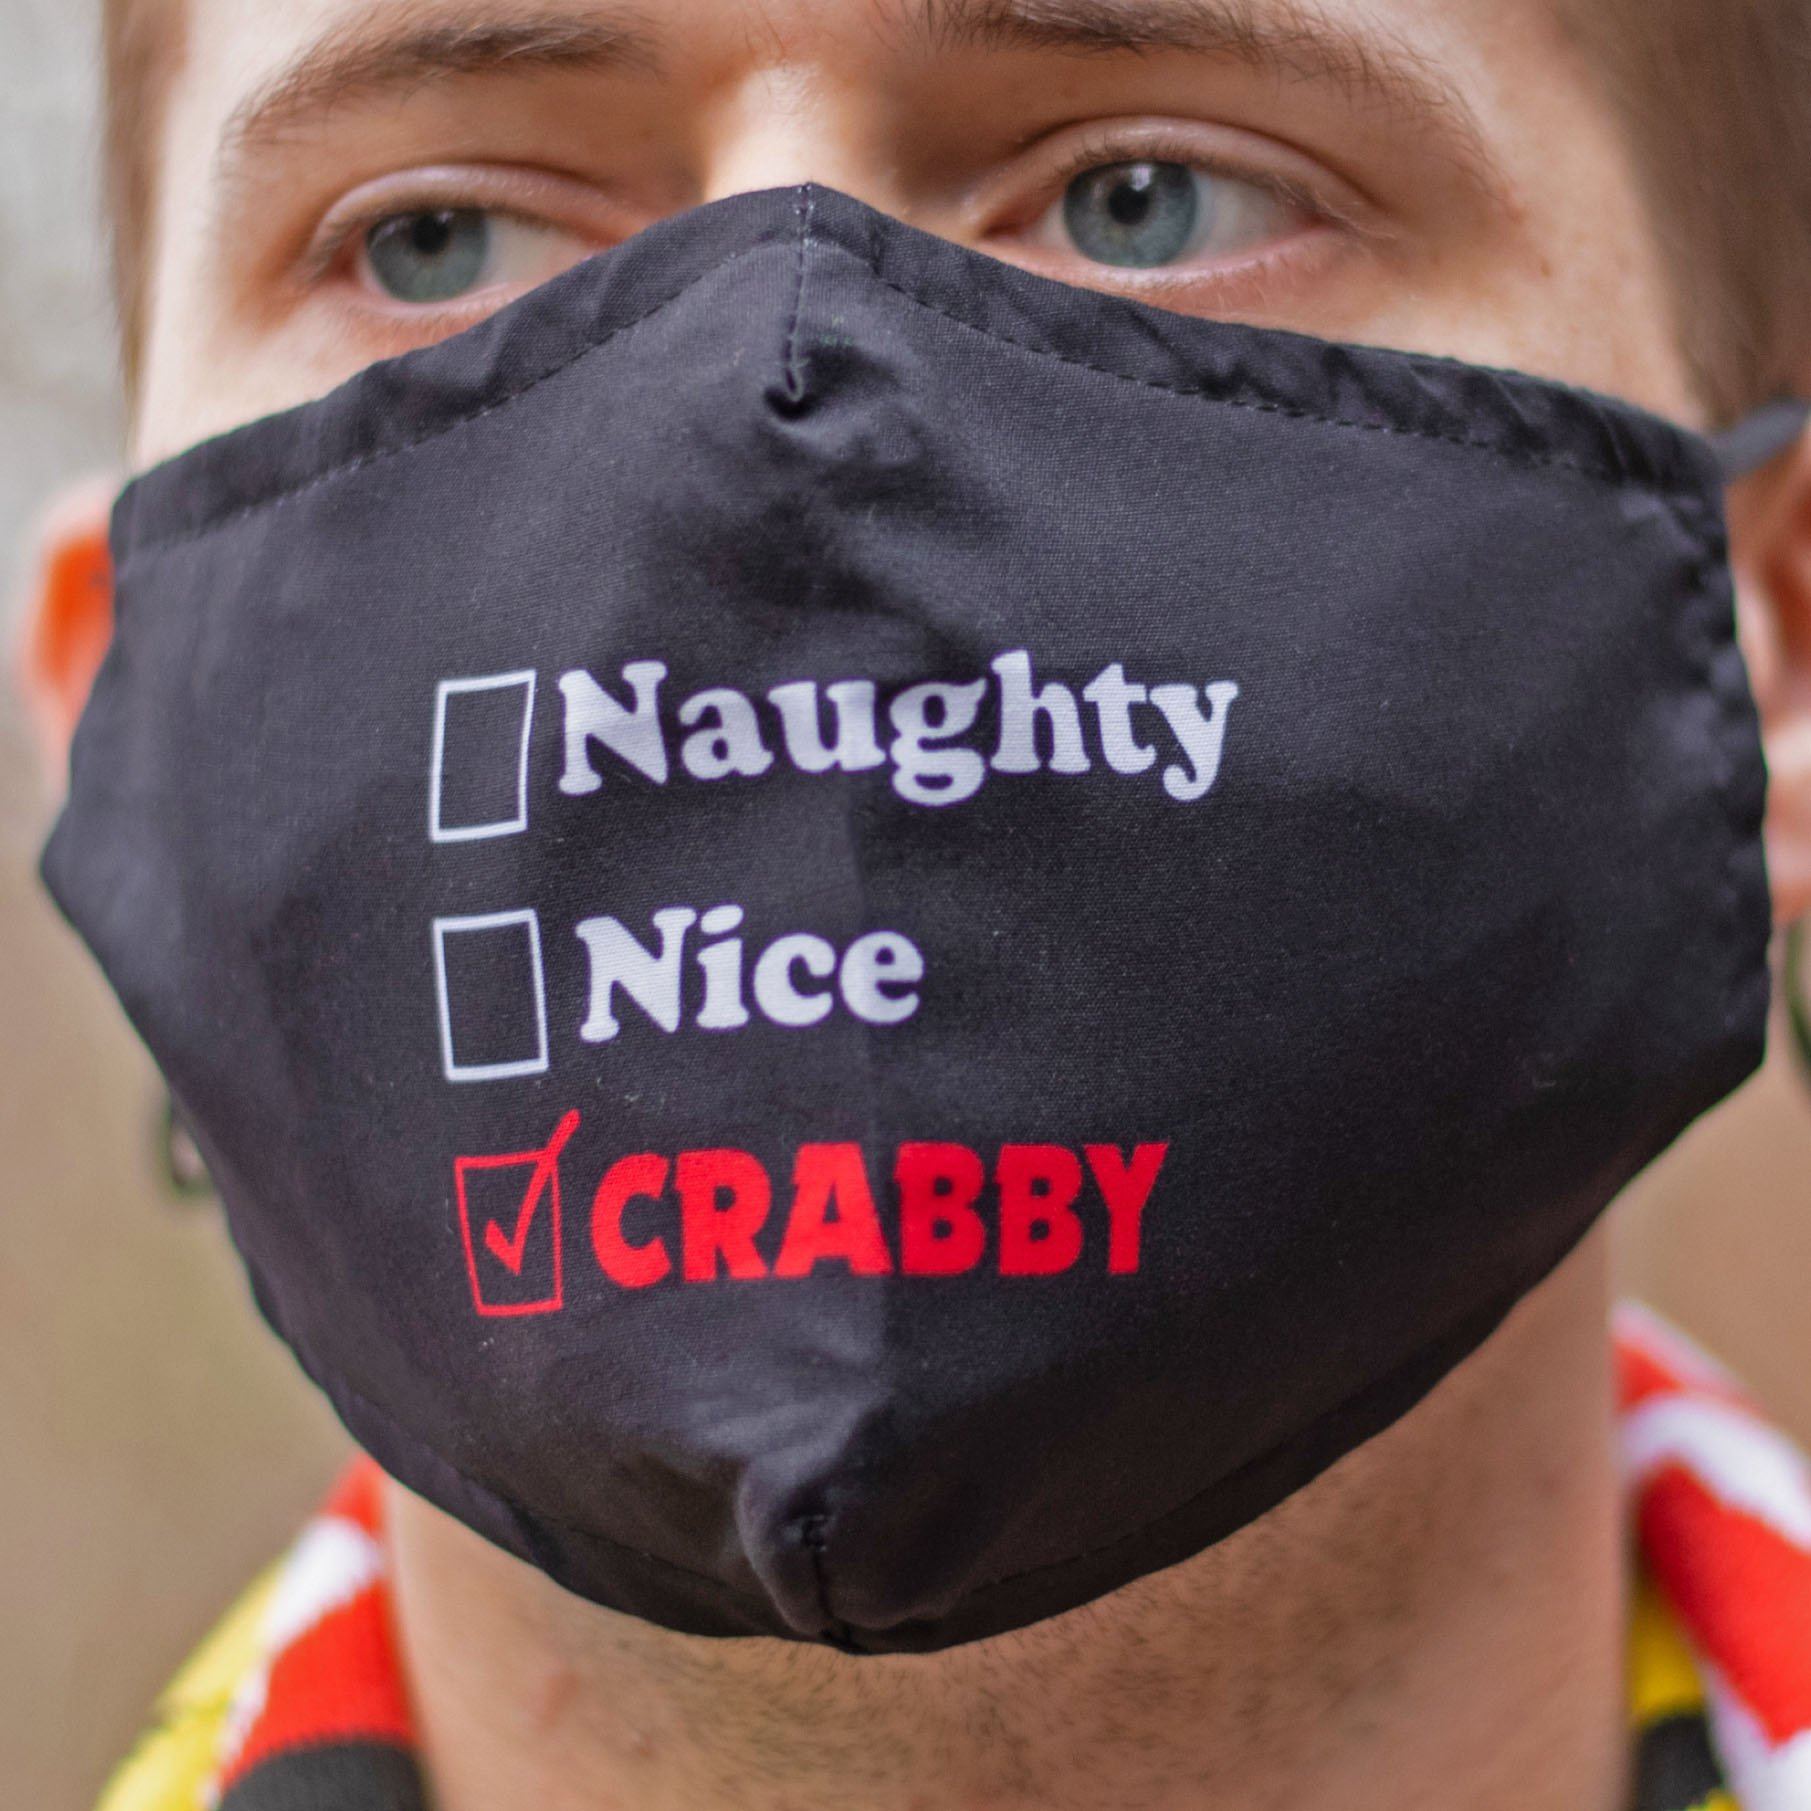 Naughty, Nice, Crabby (Black) / Face Mask - Route One Apparel